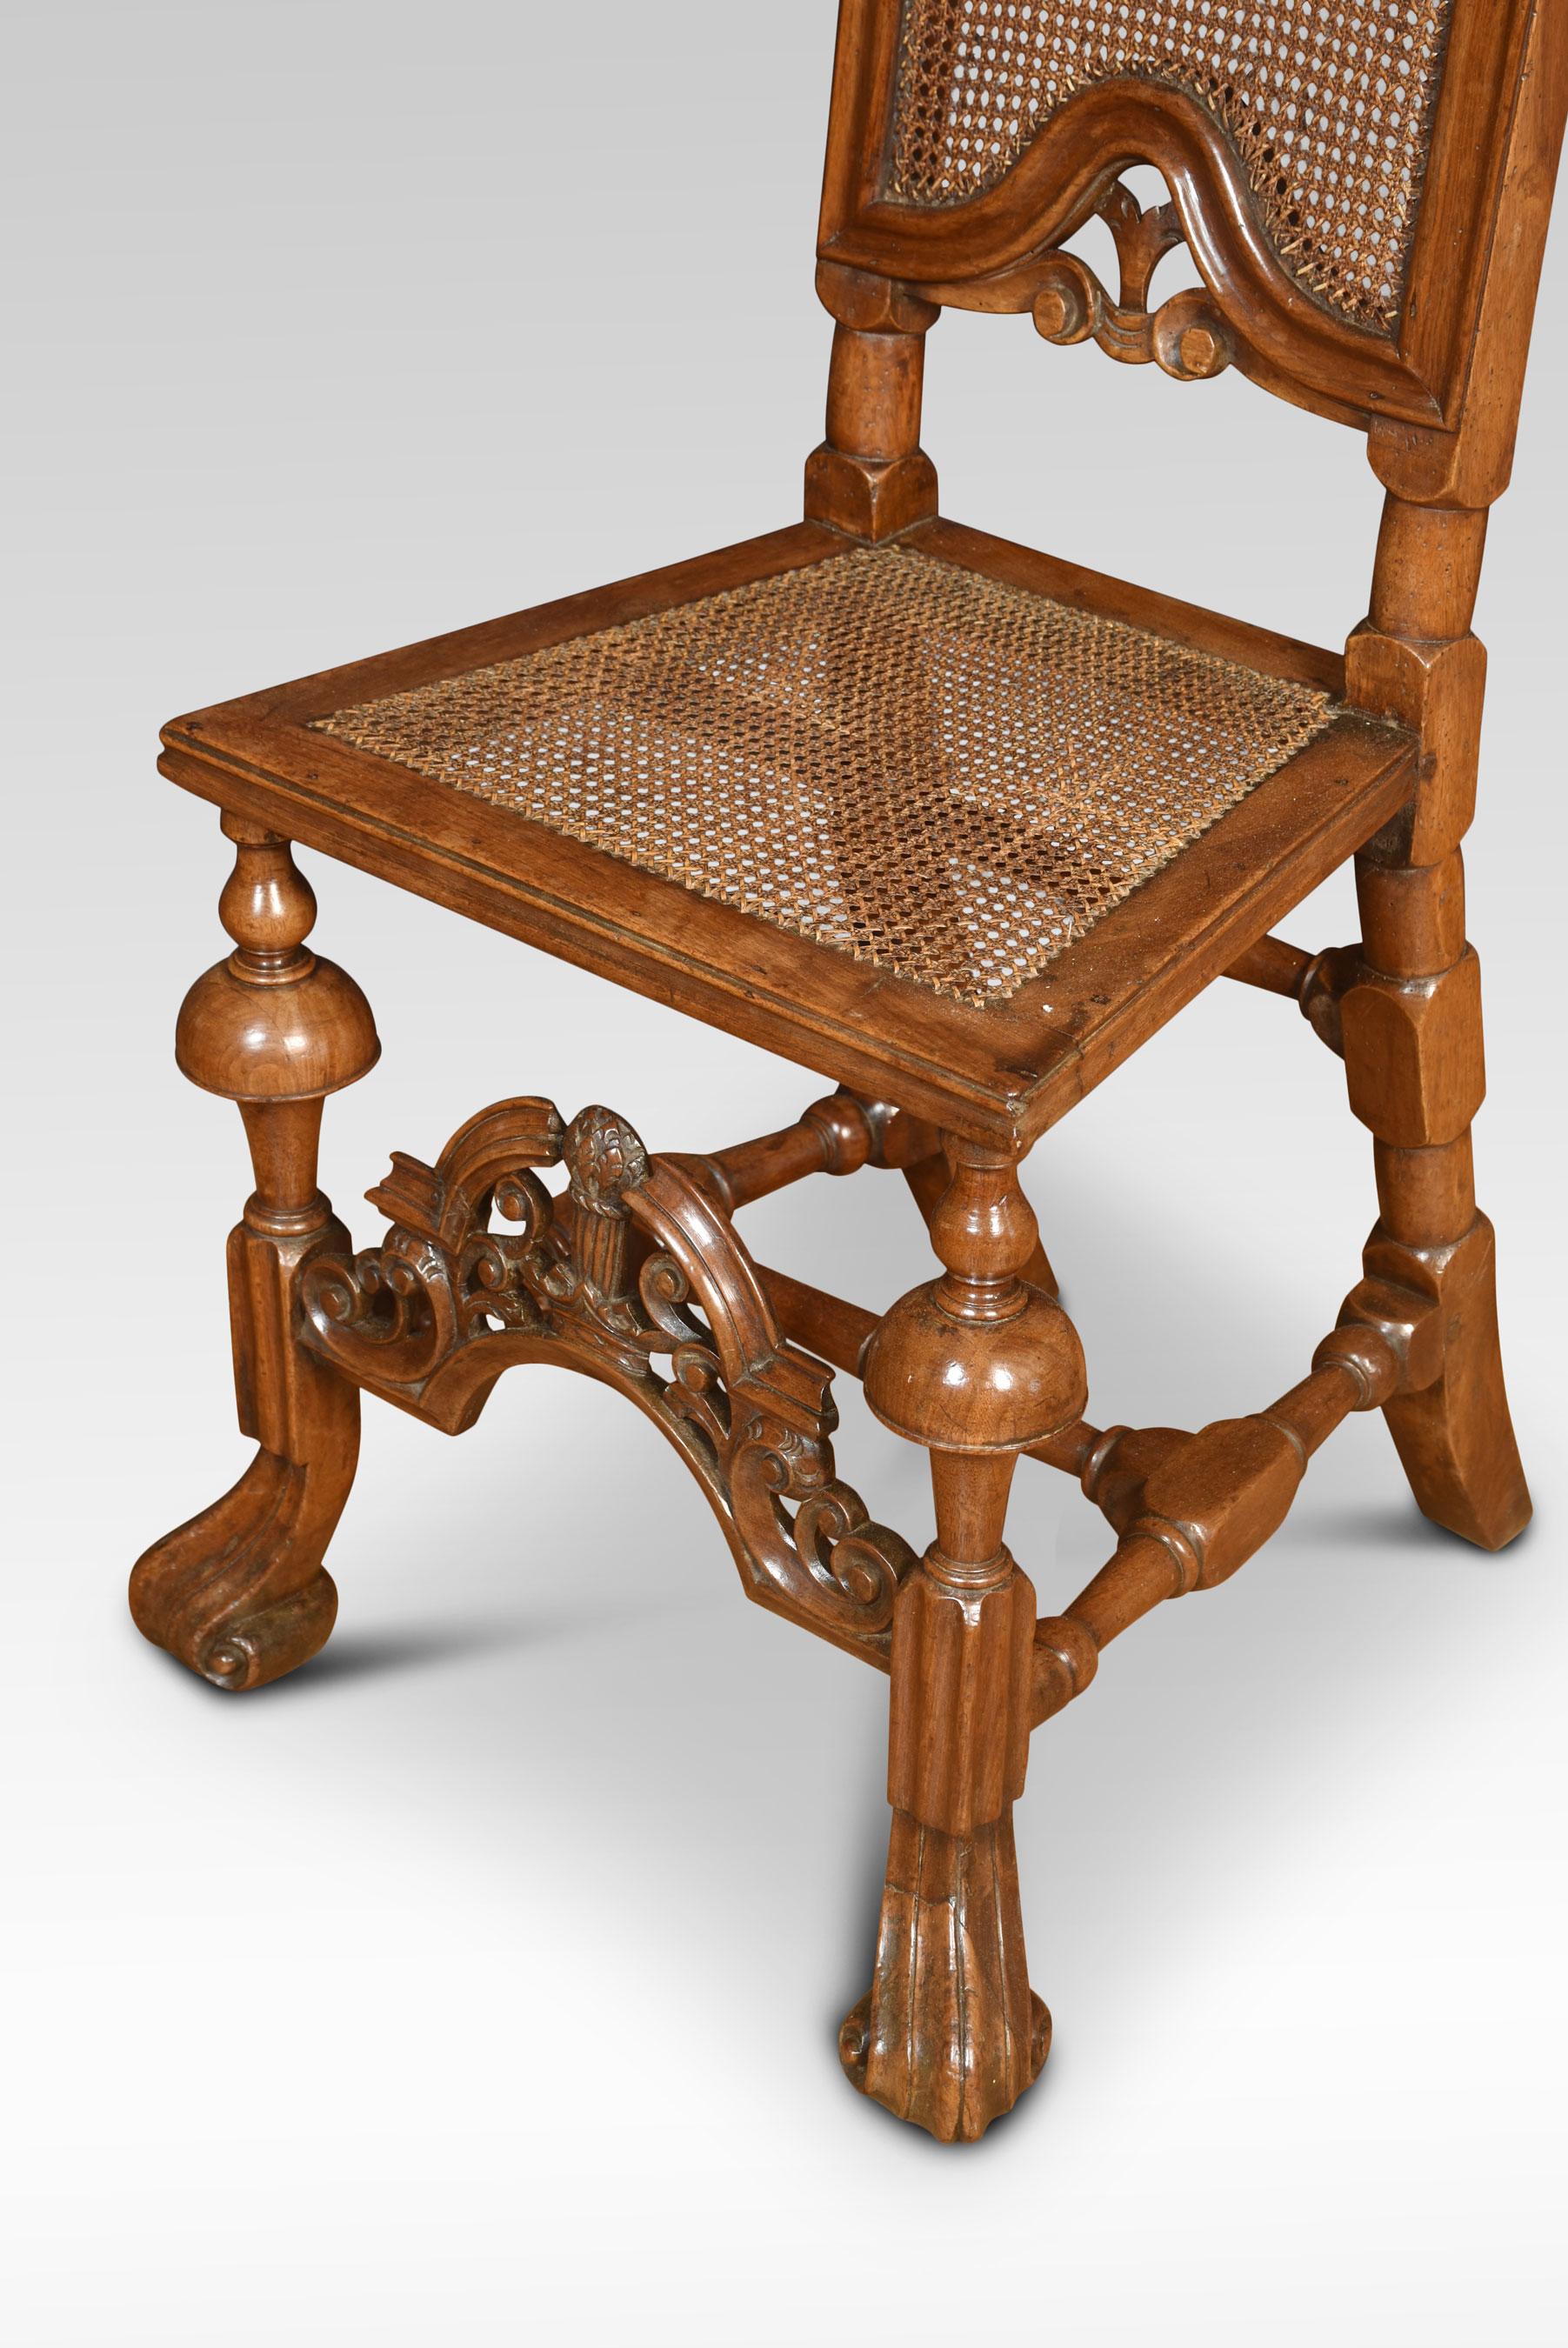 17th-century style walnut high back chair, with arched crest rail to the long cane, panelled back supported on scroll carved legs
Dimensions
Height 57.5 Inches height to seat 19 Inches
Width 21 Inches
Depth 21 Inches